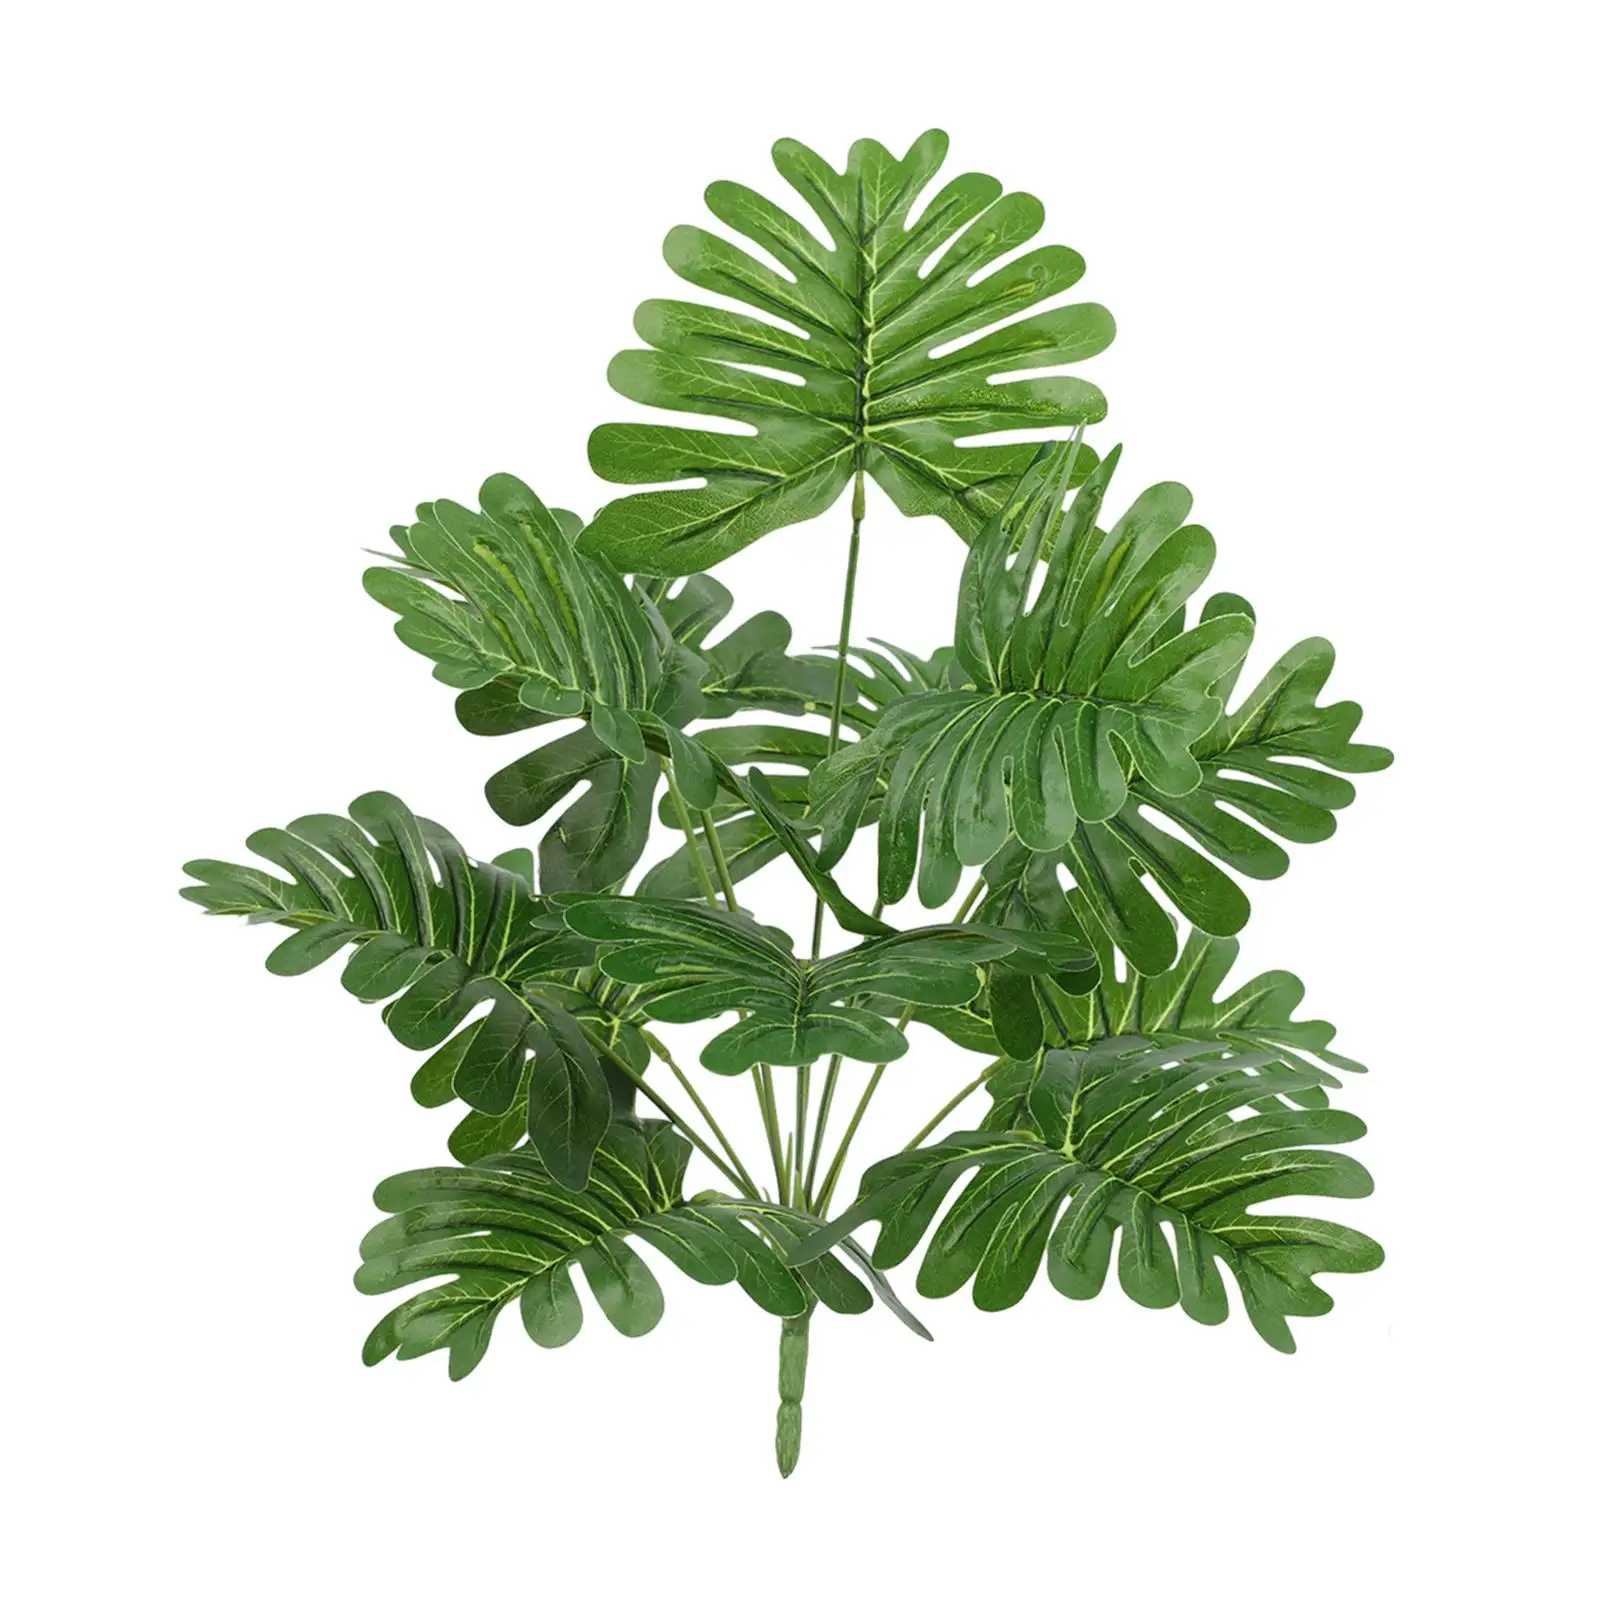 Faux Plants Realistic Green Greenery Decoration Home Decor Garden Decoration for Desk Living Room Indoor Bathroom Office